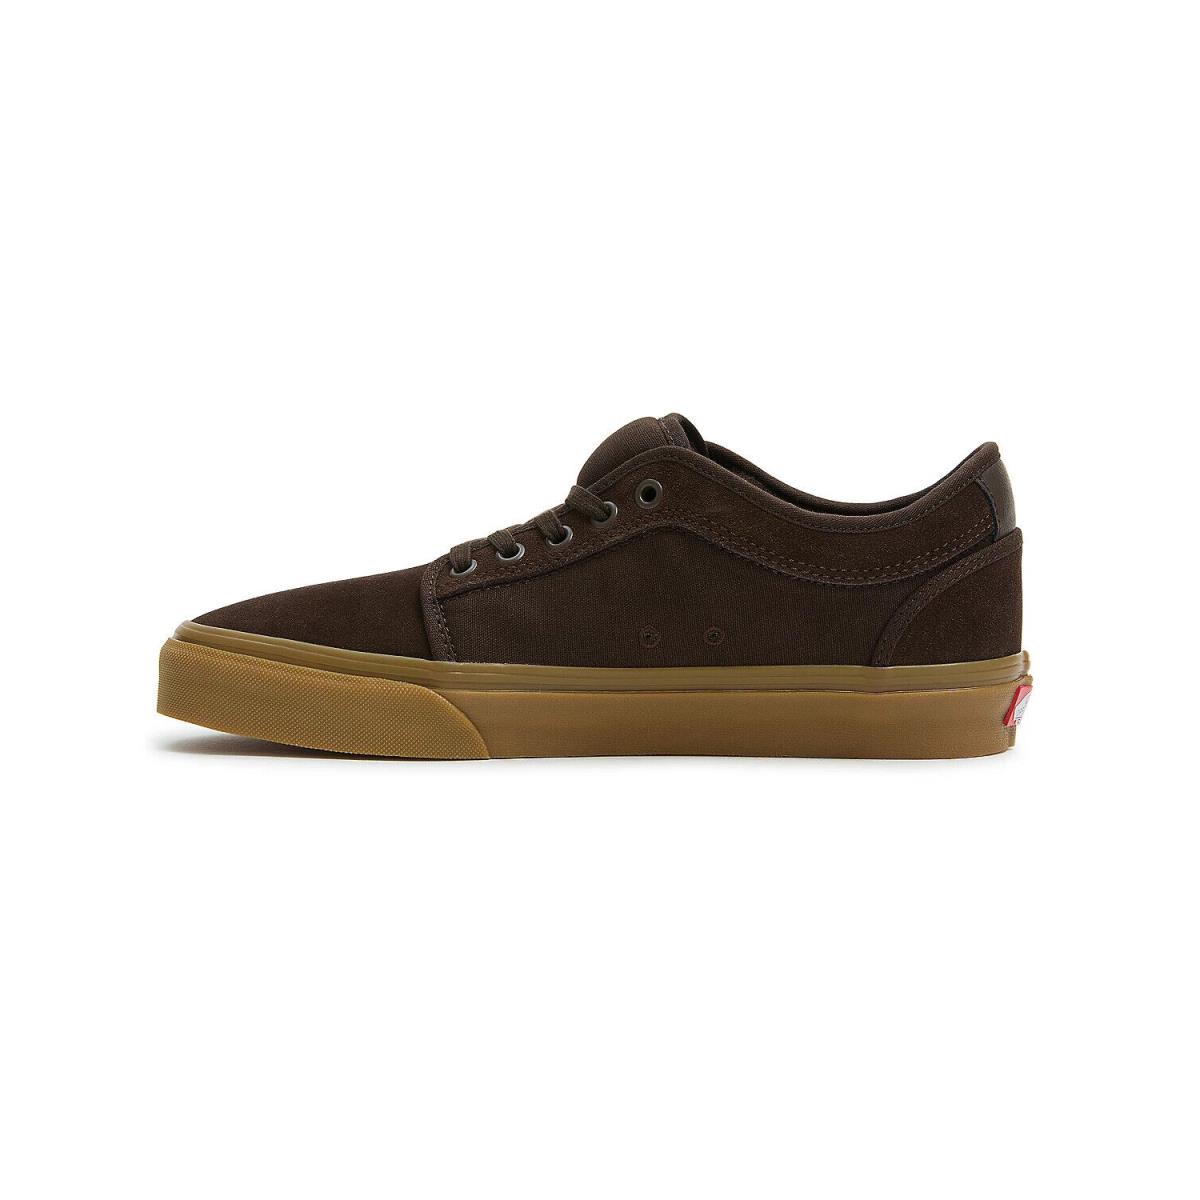 Vans Skate Chukka Low Brown VN0A4BX4BF3 Shoes - Brown